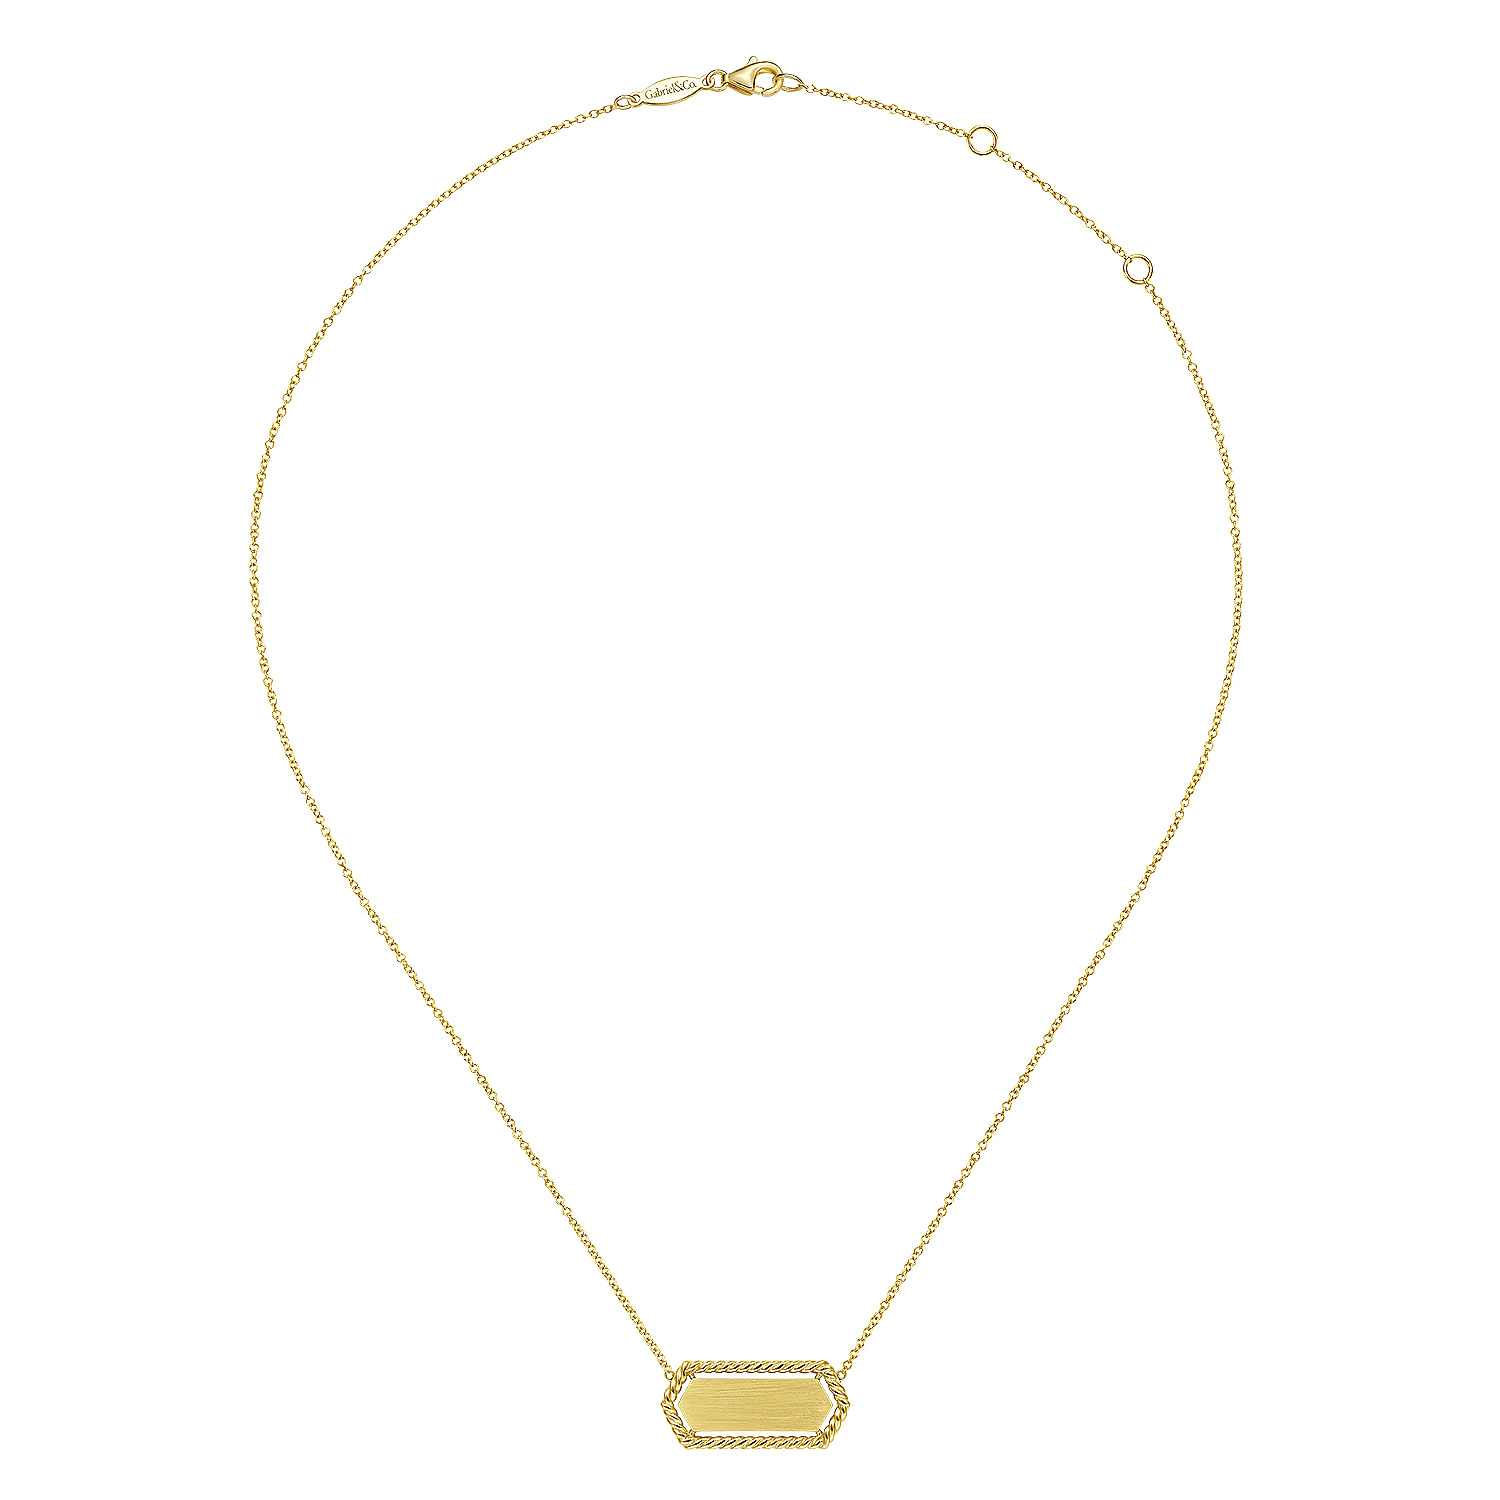 14K Yellow Gold Hexagonal Rectangle ID Necklace with Twisted Rope Frame